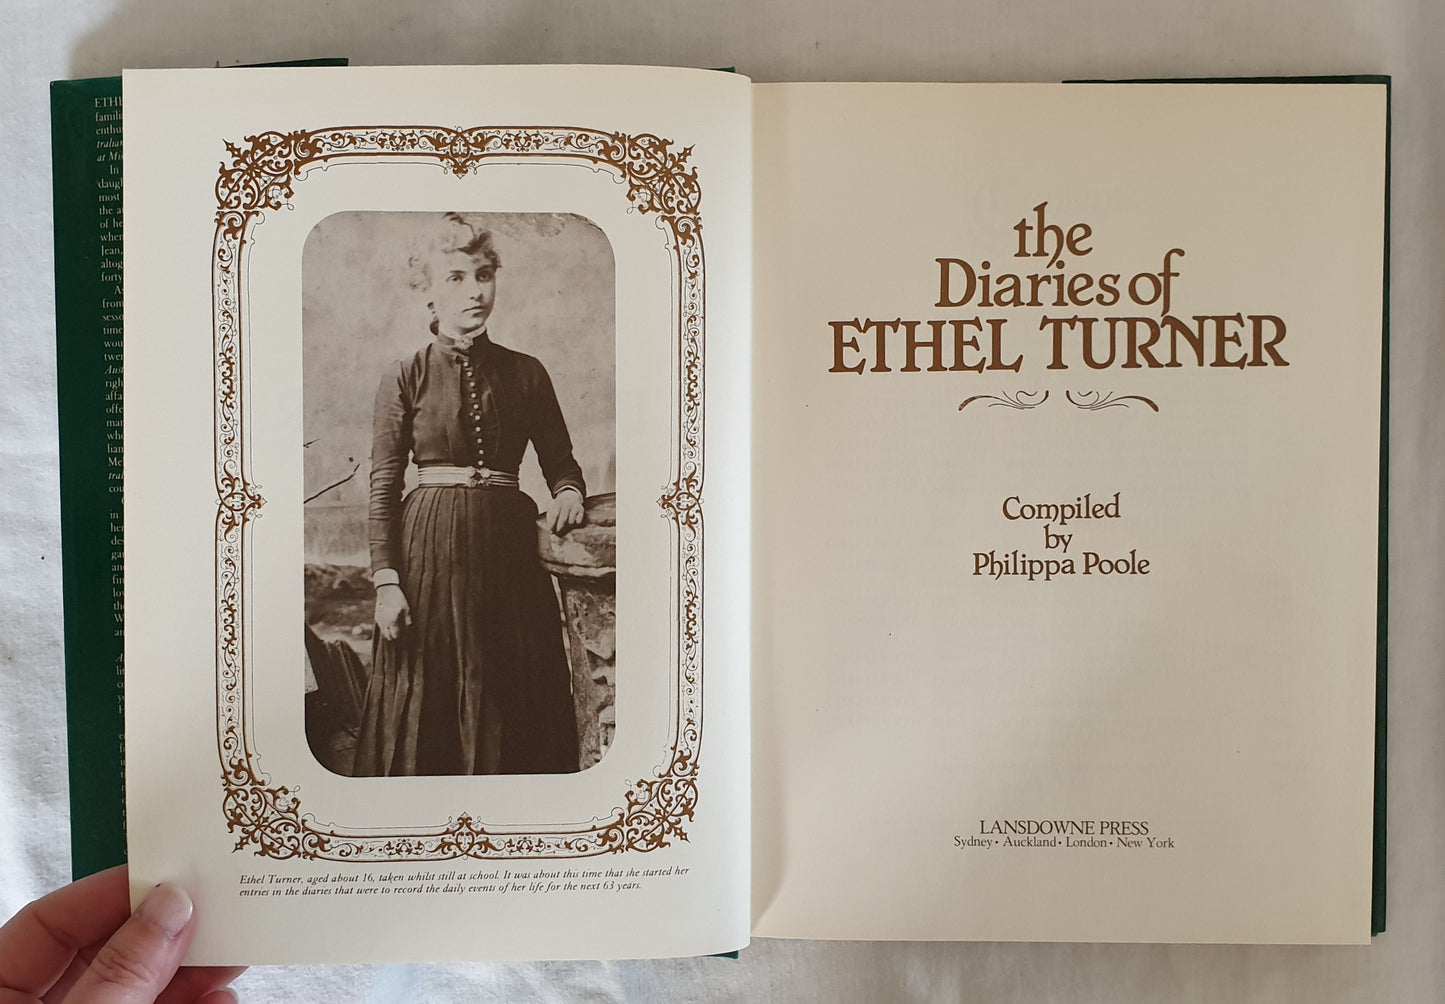 The Diaries of Ethel Turner by Philippa Poole